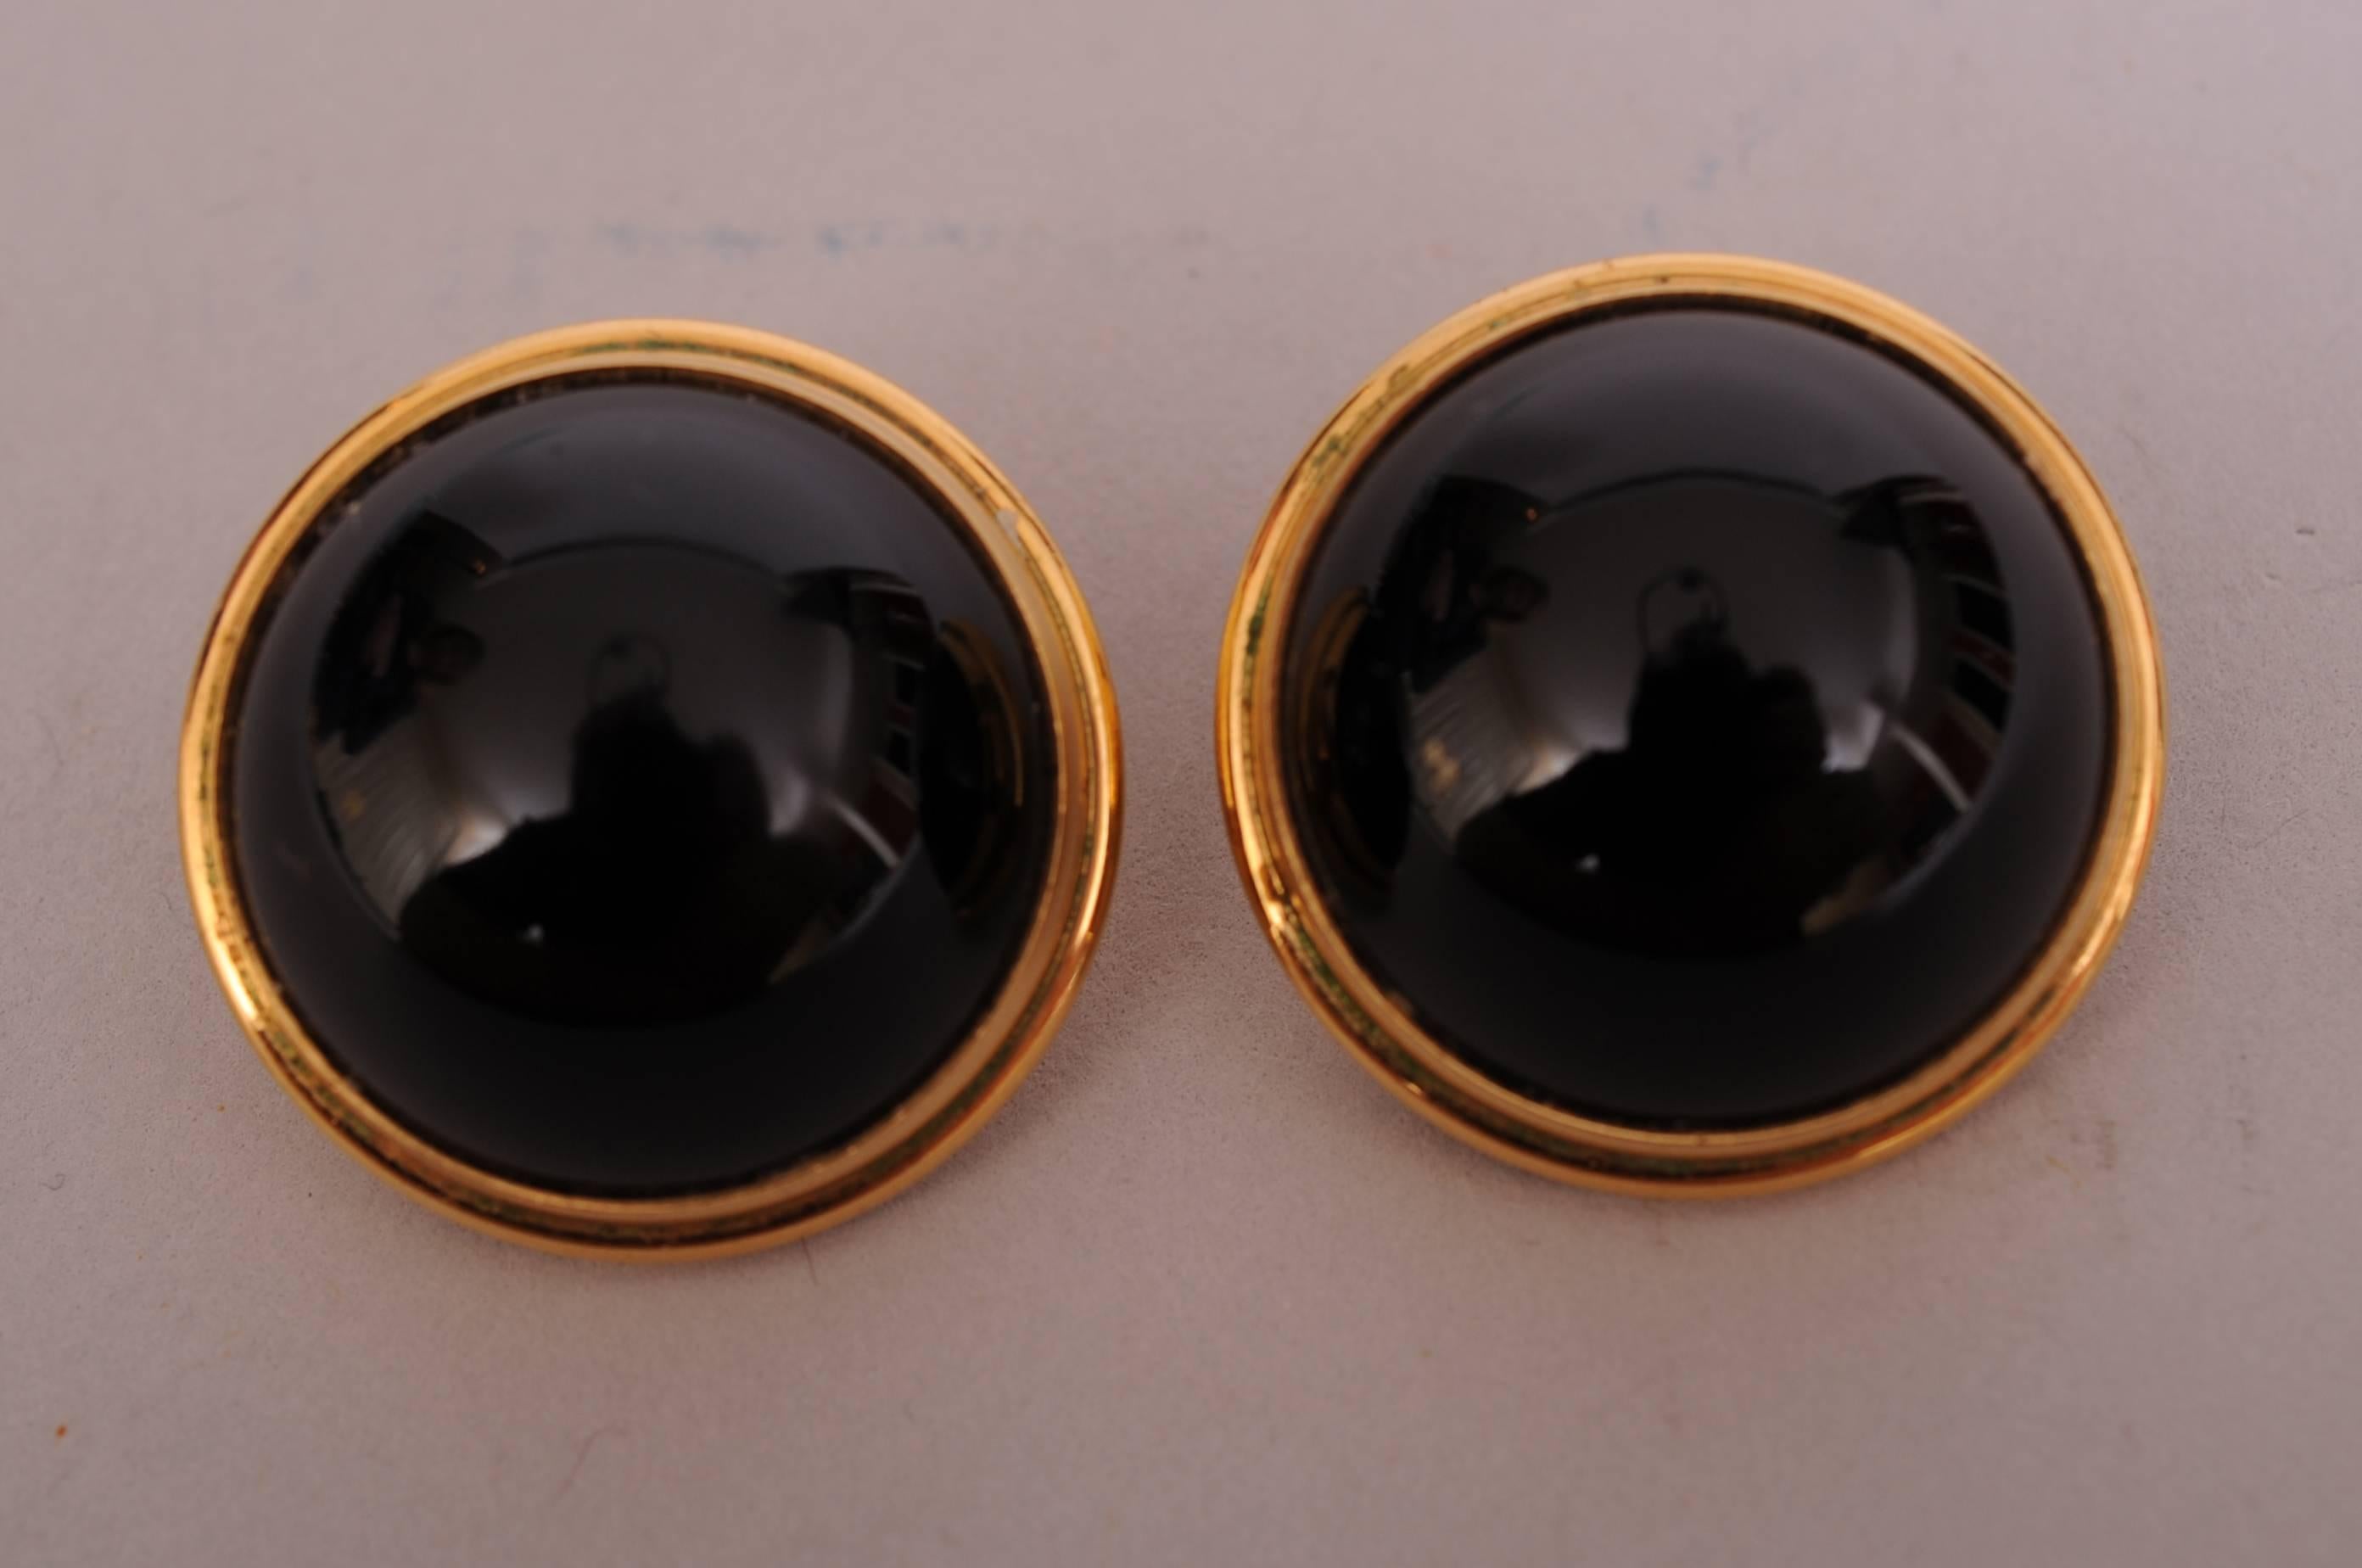 Lalique  black crystal cabochons are ringed with a raised gold toned band. The earrings are clip backs and are marked Lalique, France on the back. They are in excellent condition.
Measurements;
Height 1/2